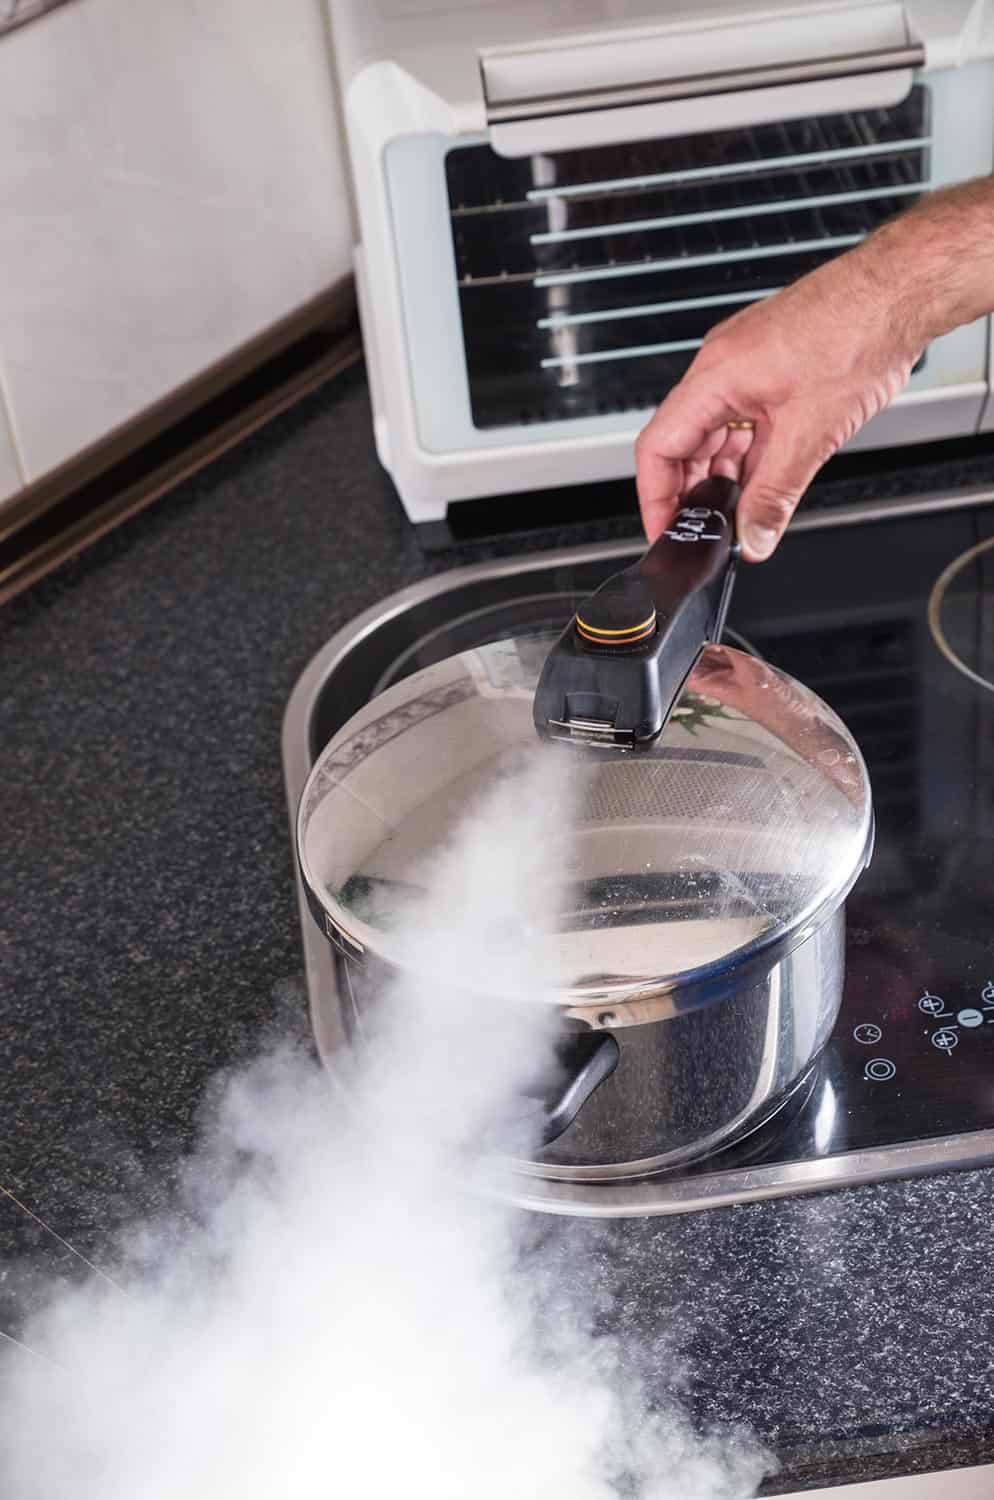 Releasing steam from a pressure cooker